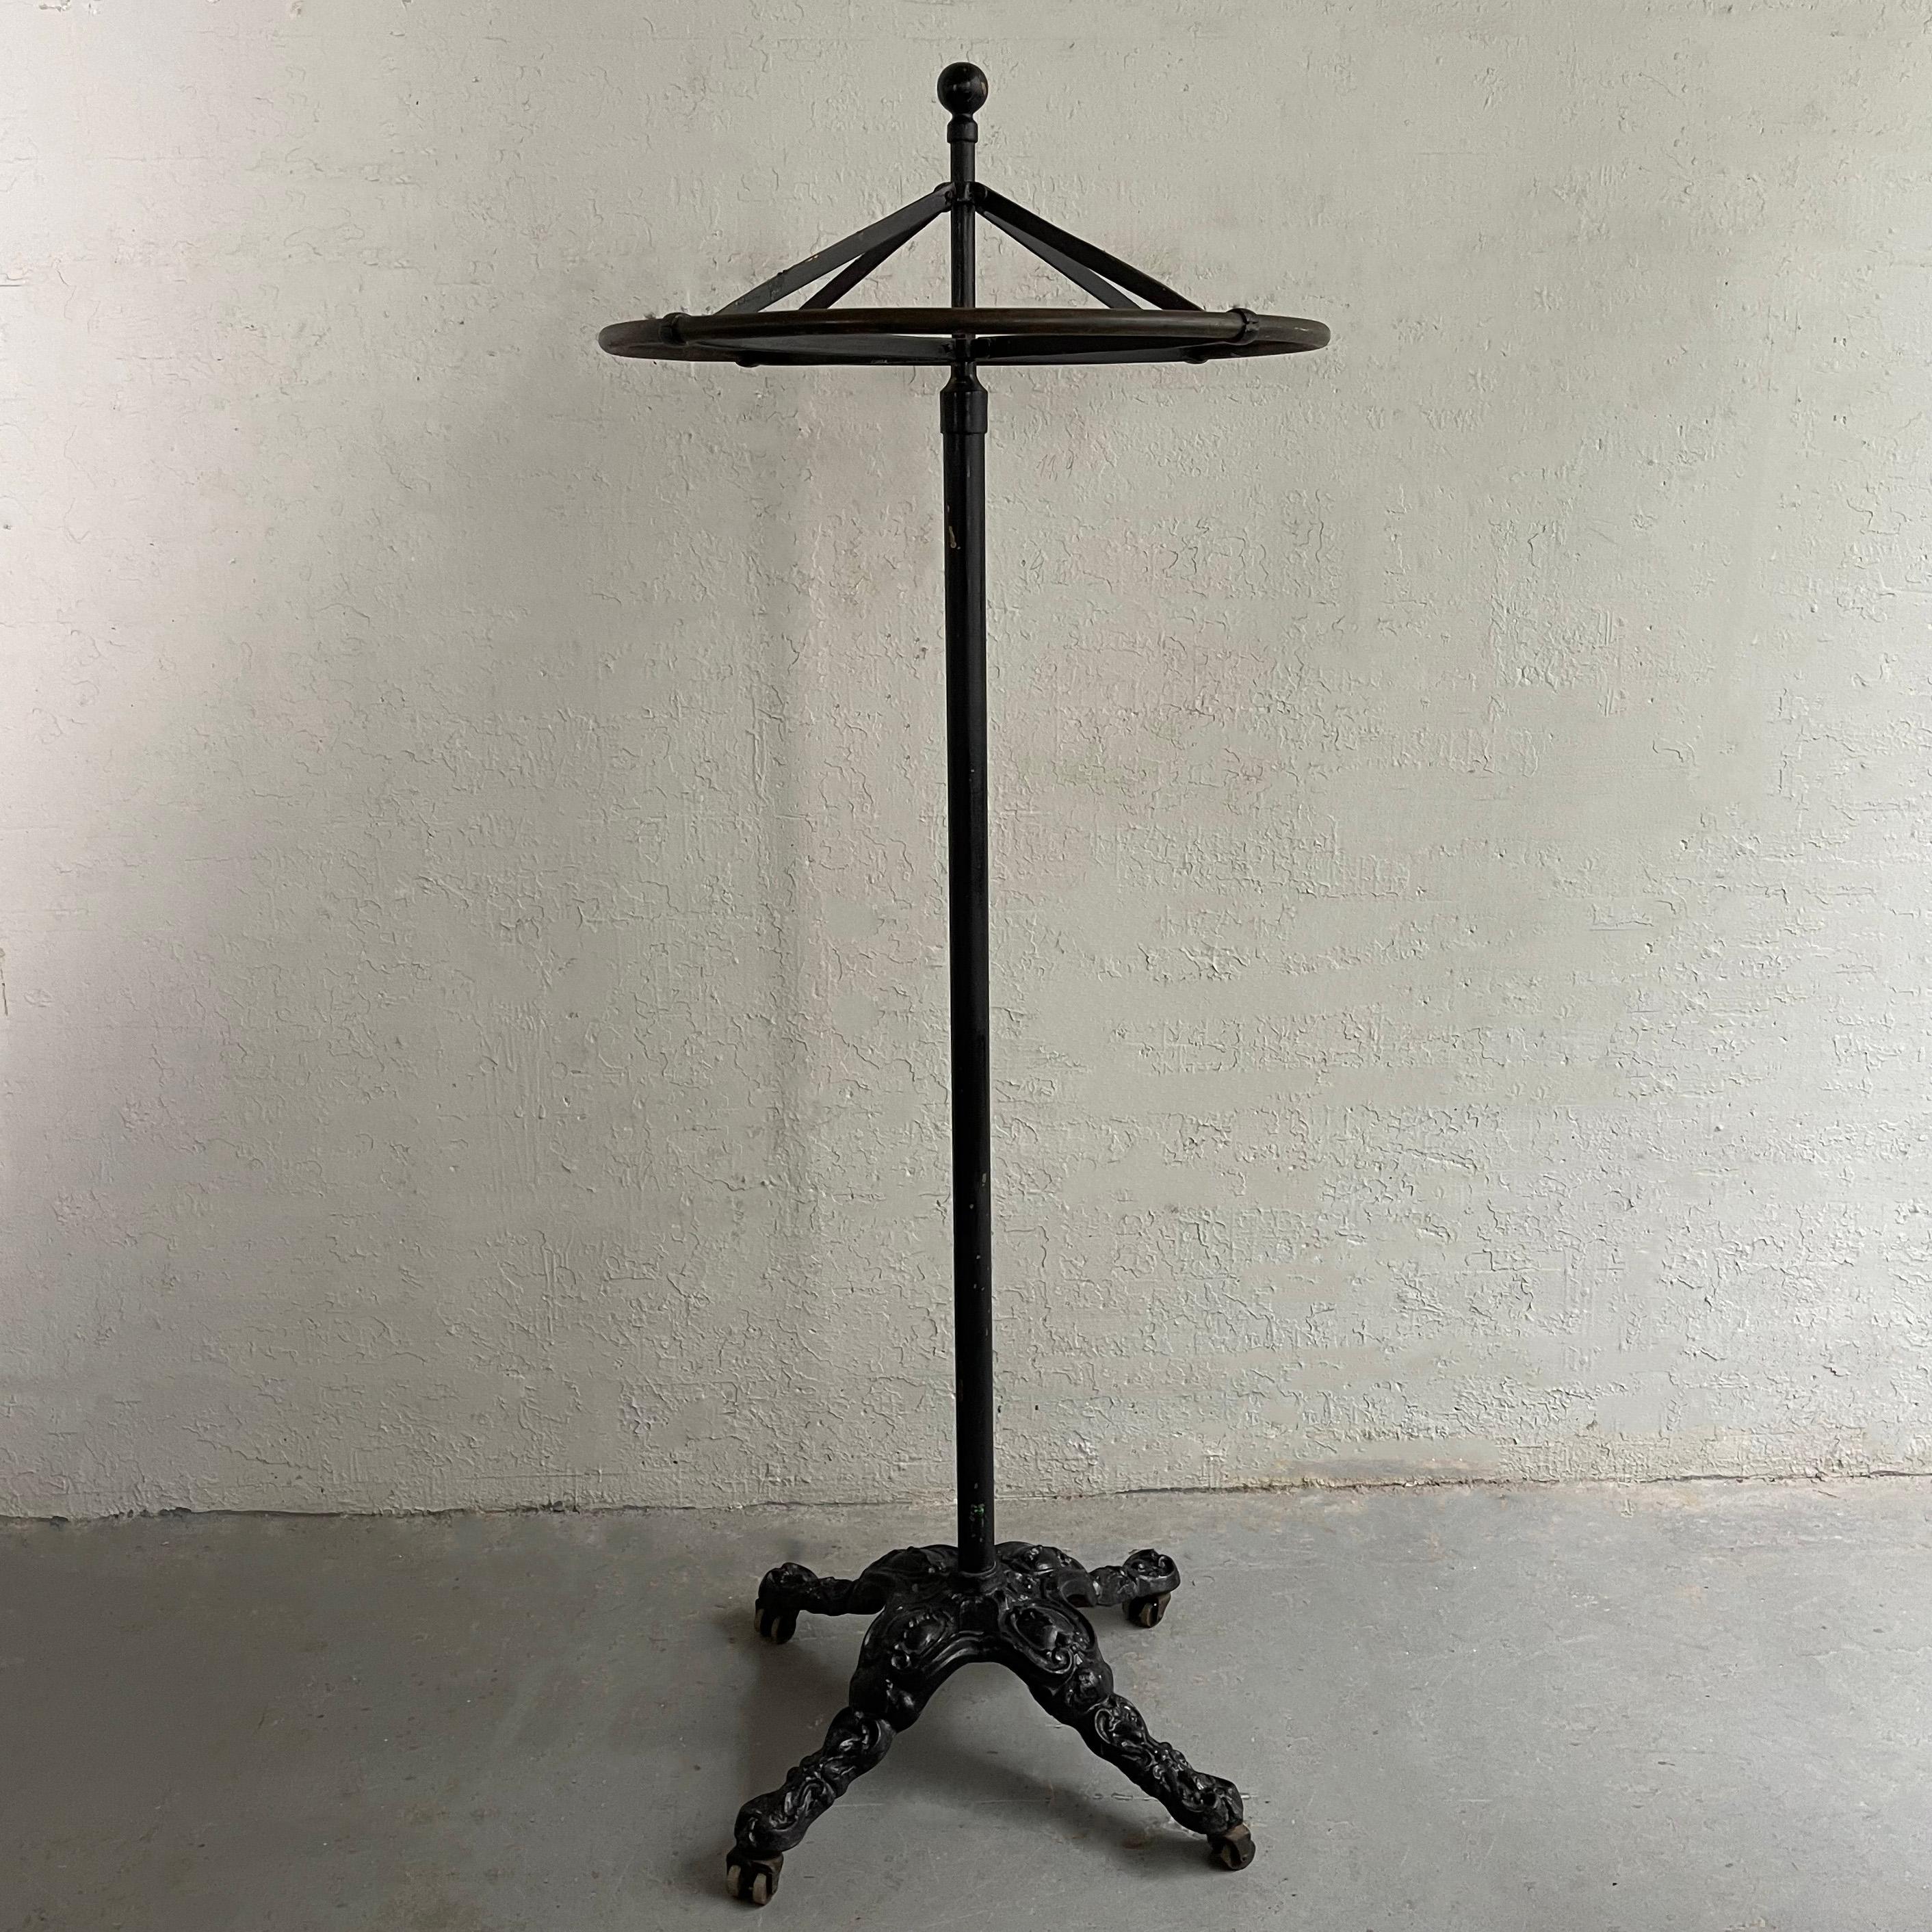 Early 20th century, industrial, cast iron rounder garment rack features a 30 inch round rotating rack on a rolling stem with ornate base. The round rack separates from the stem for transport.